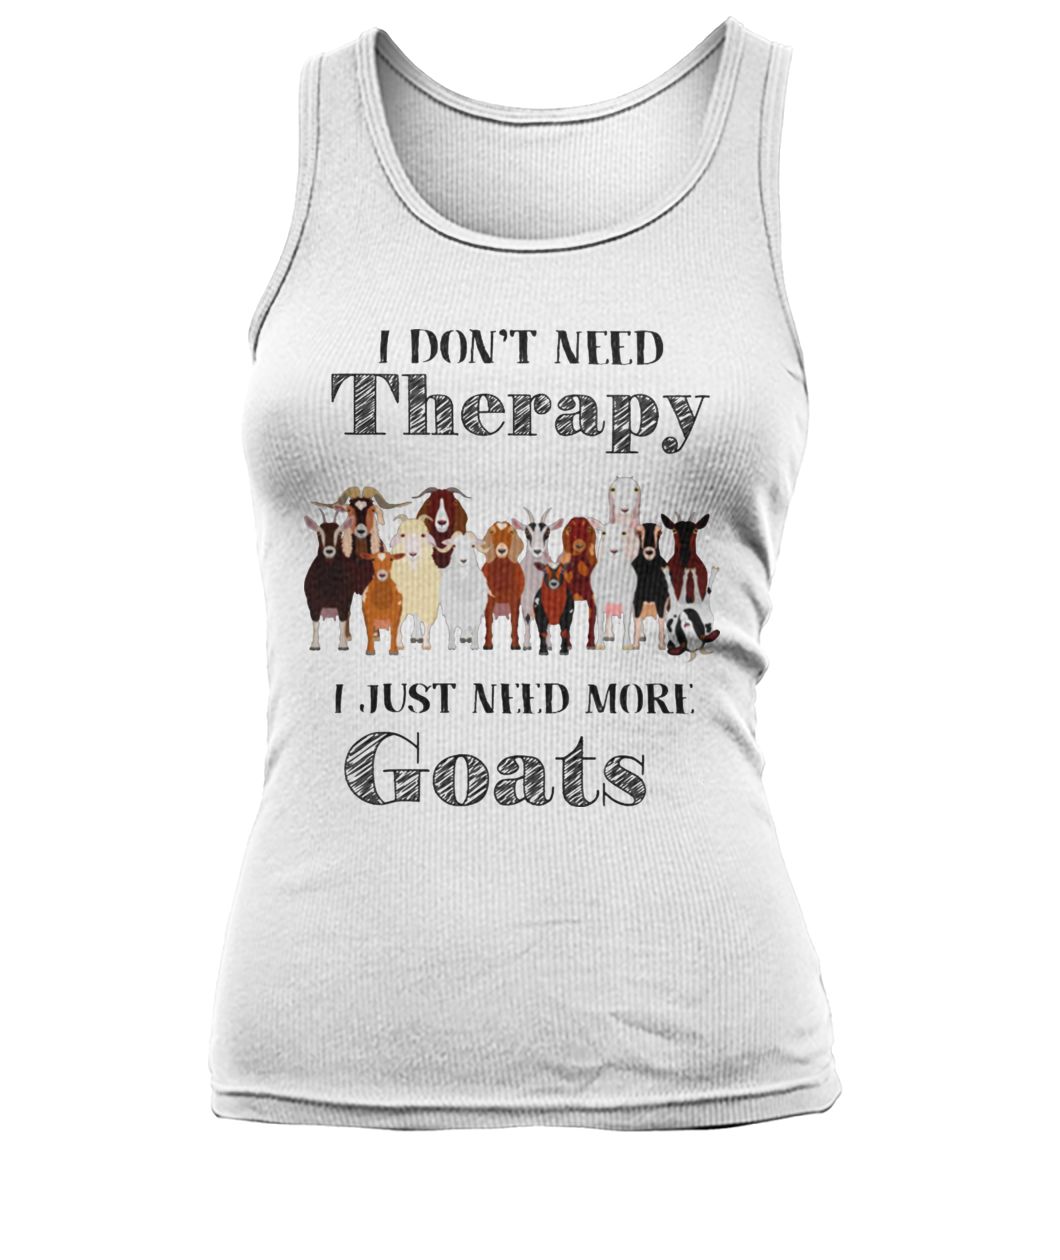 I don't need therapy I just need more goats women's tank top